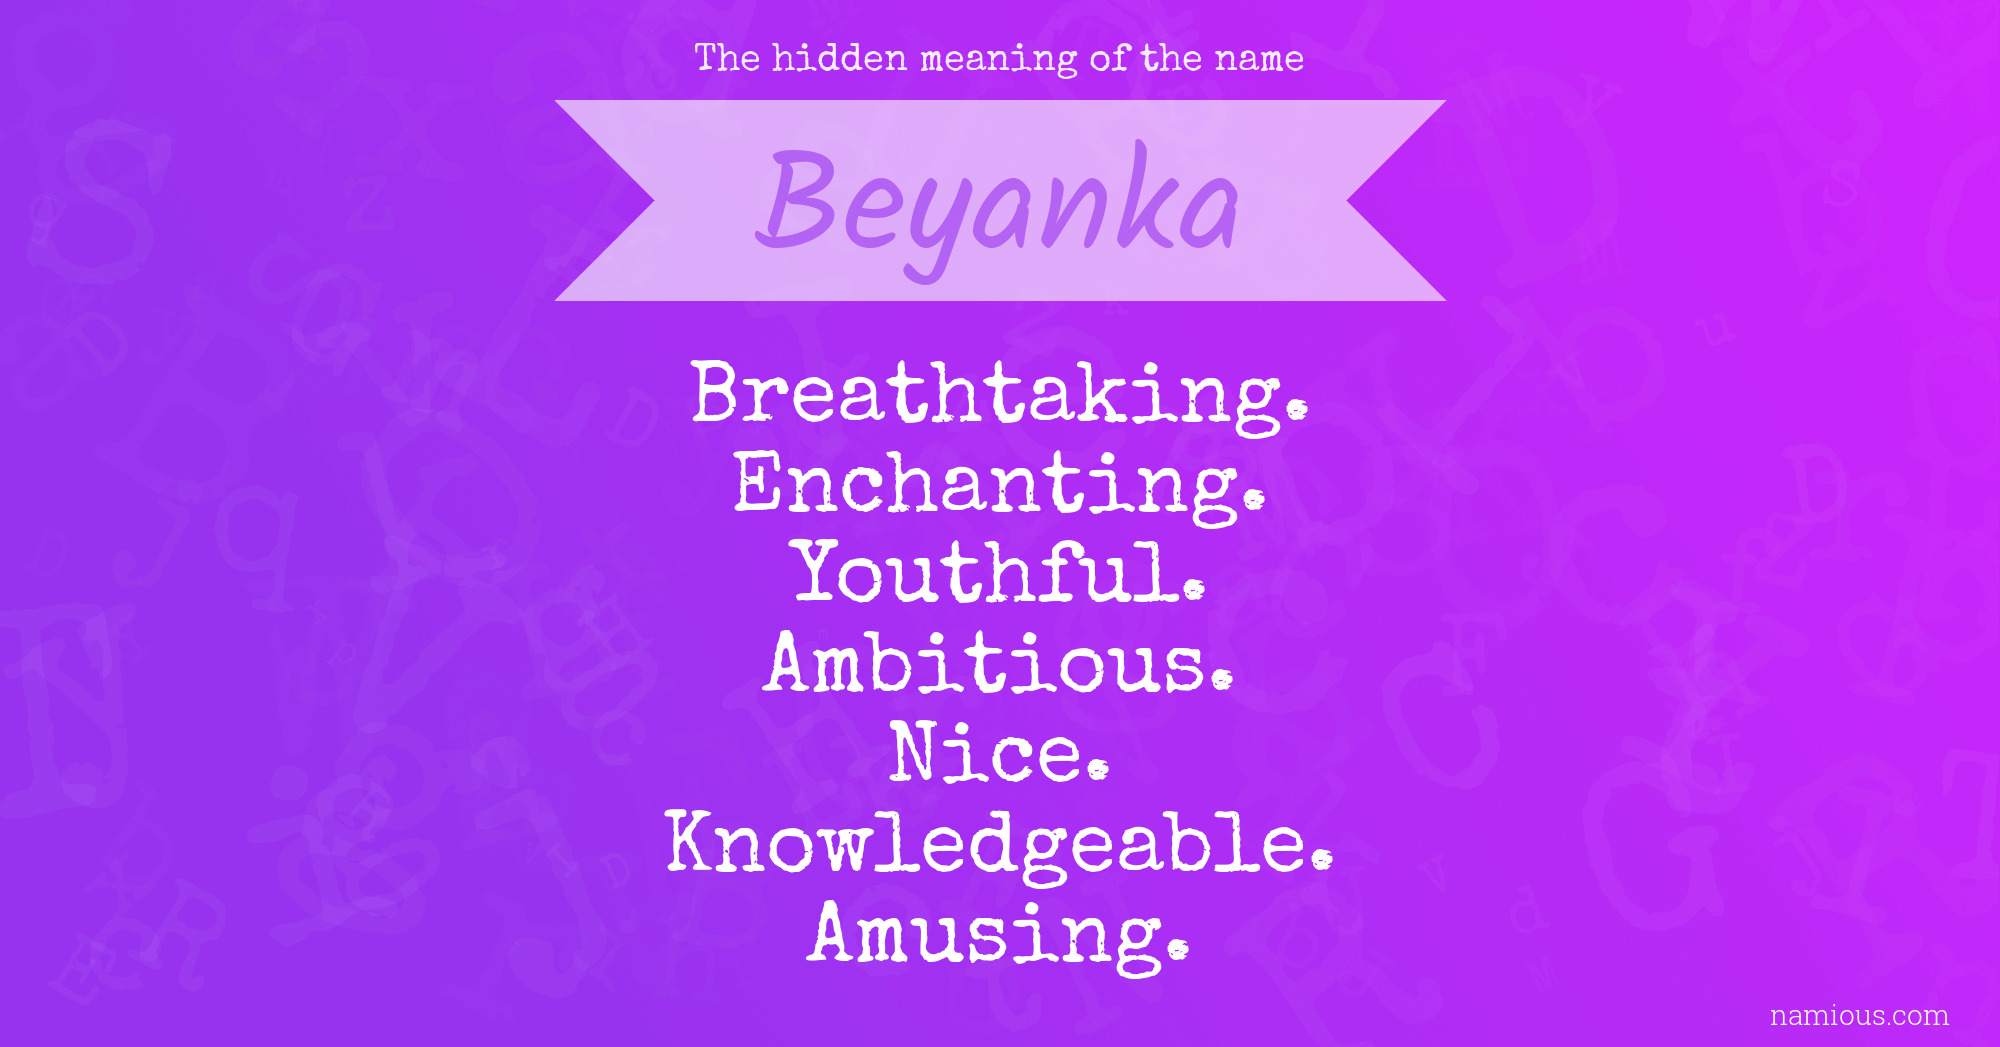 The hidden meaning of the name Beyanka